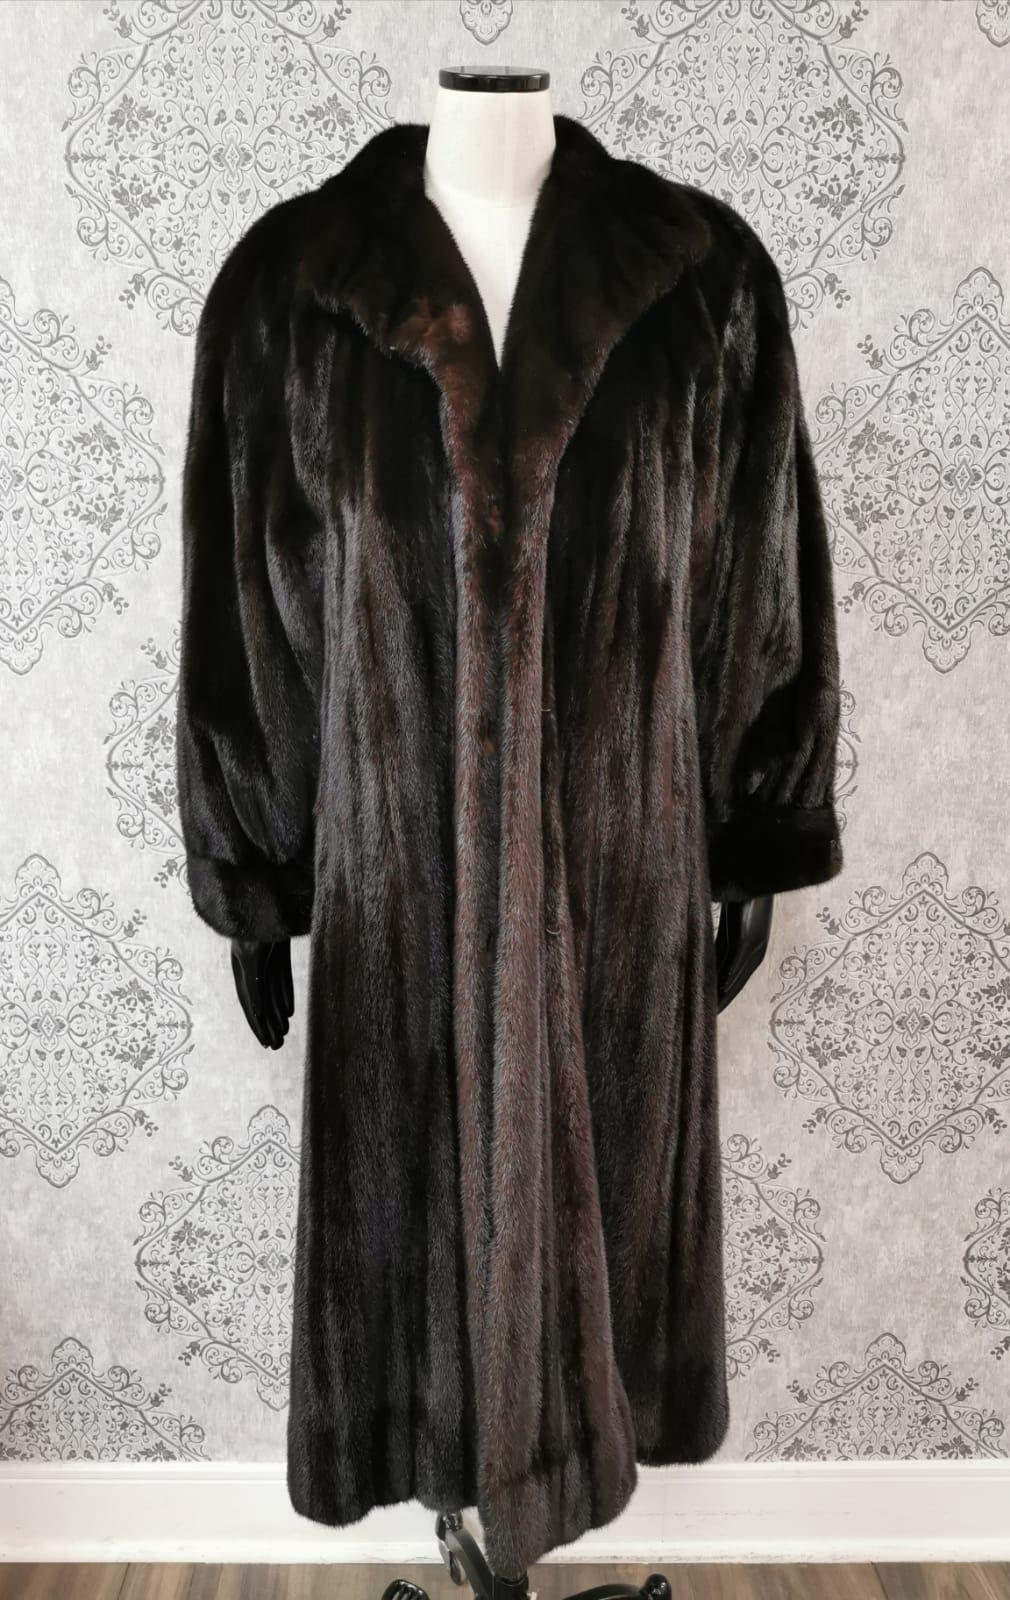 DESCRIPTION : VALENTINO MINK FUR COAT SIZE 16

Portrait collar, supple skins, beautiful fresh fur, european german clasps for closure, too slit pockets, nice big full pelts skins in excellent condition.

Brand: Valentino 
Made in Italy
stock number